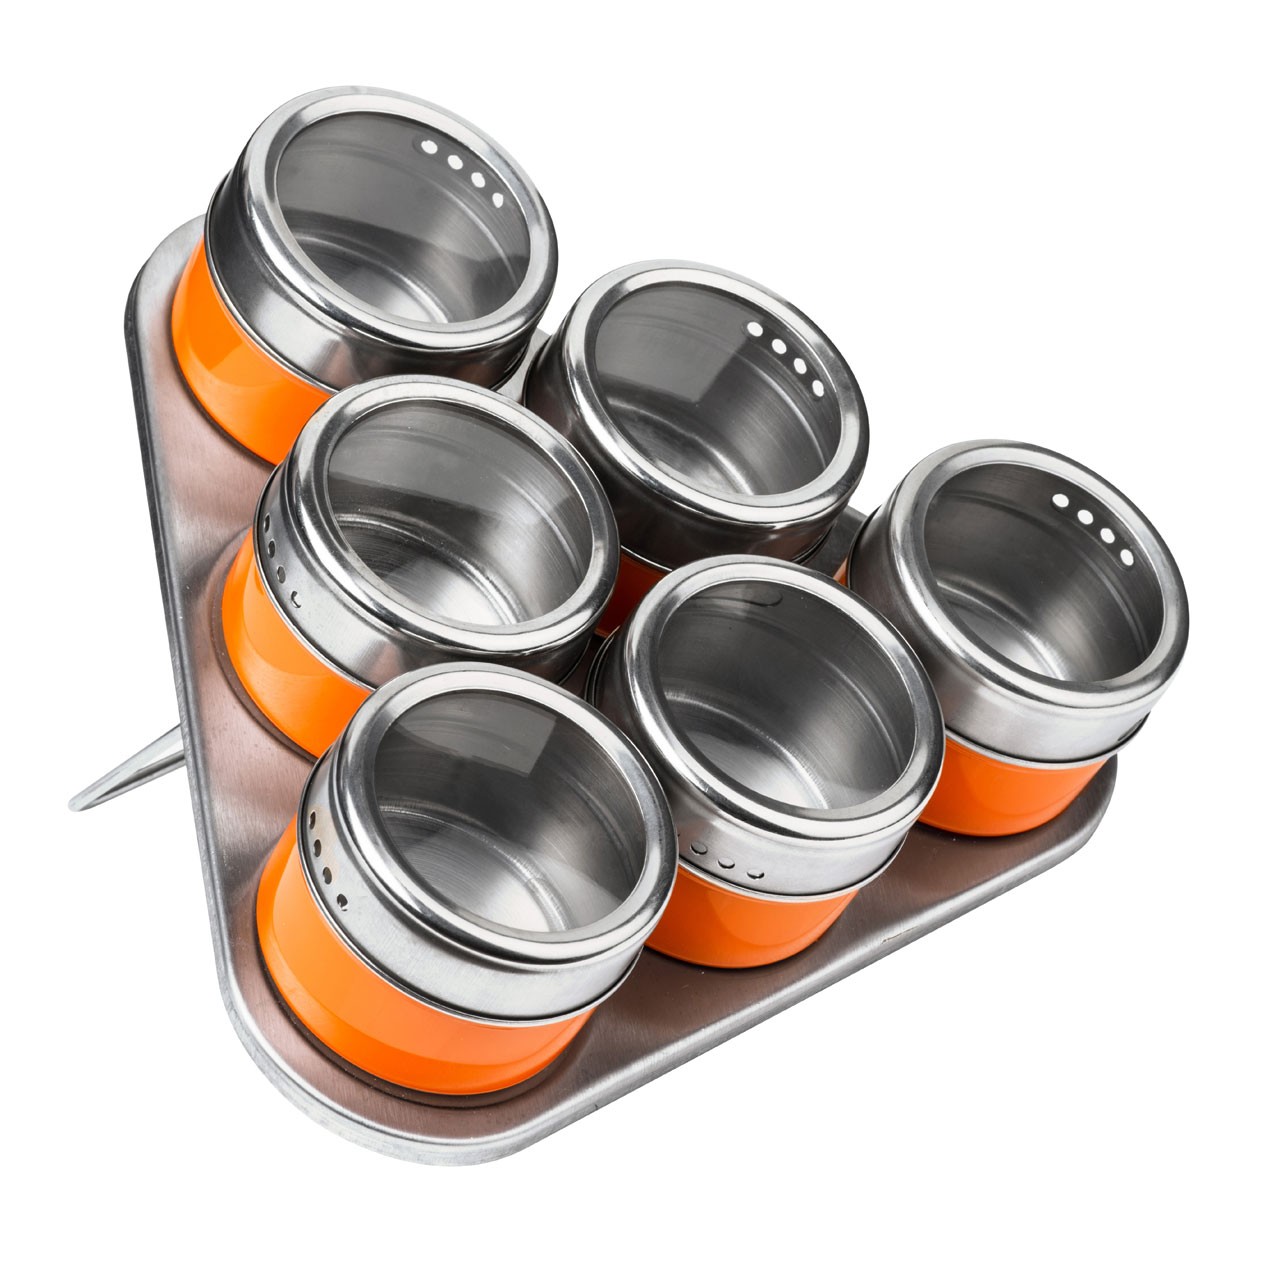 Magnetic Tray with 6 Spice Jars - Orange